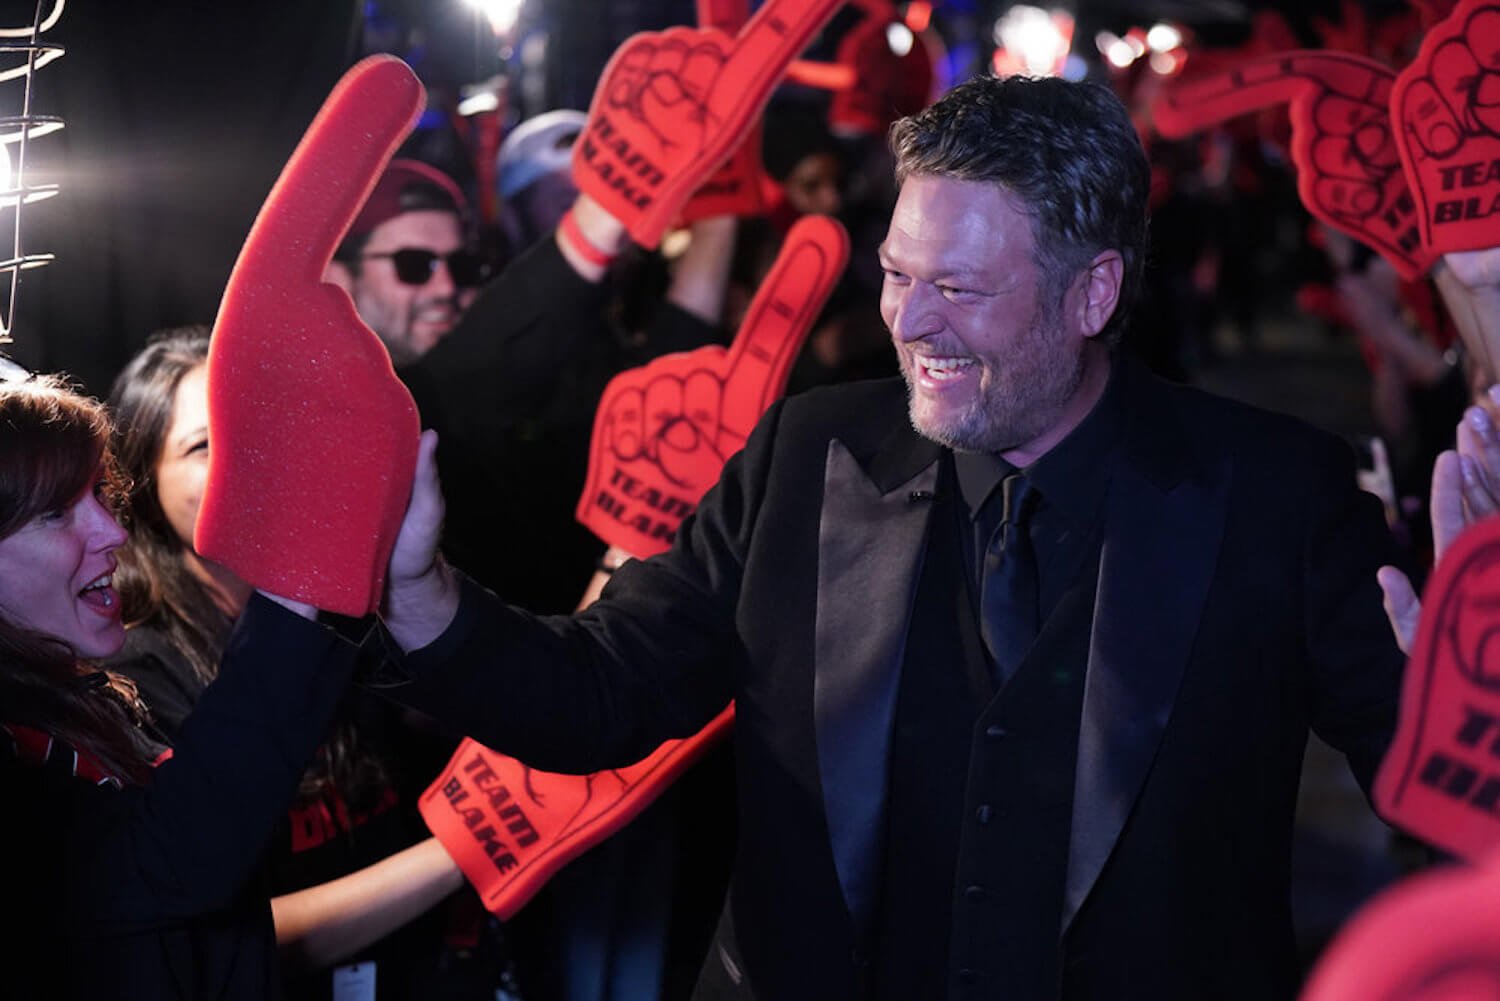 Blake Shelton from 'The Voice' laughing while surrounded by fans with foam fingers